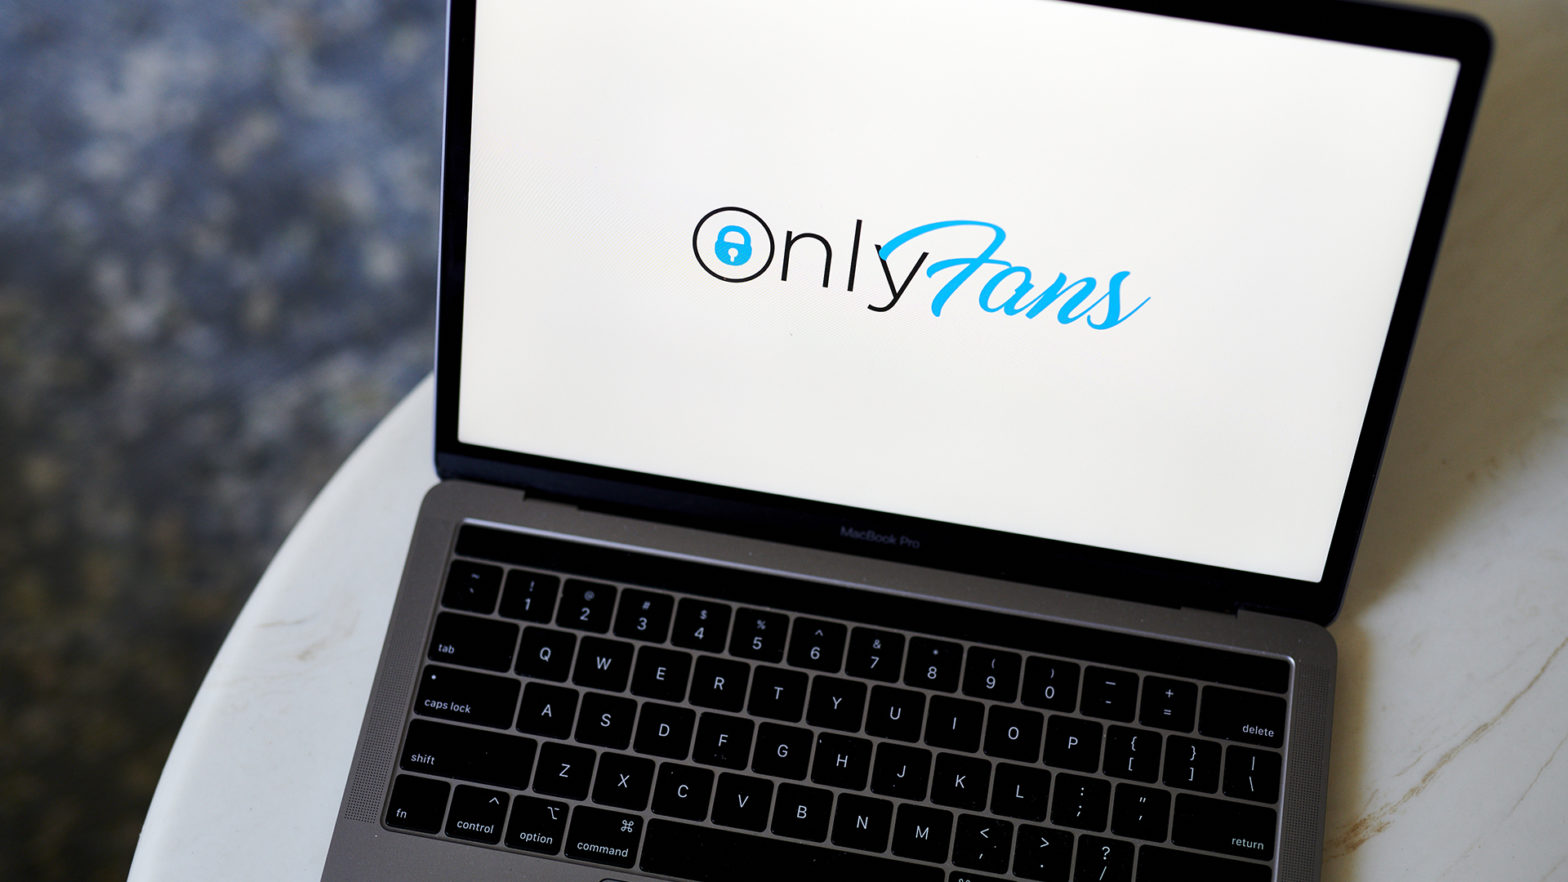 On how mark to check onlyfans get Discount: Onlyfans